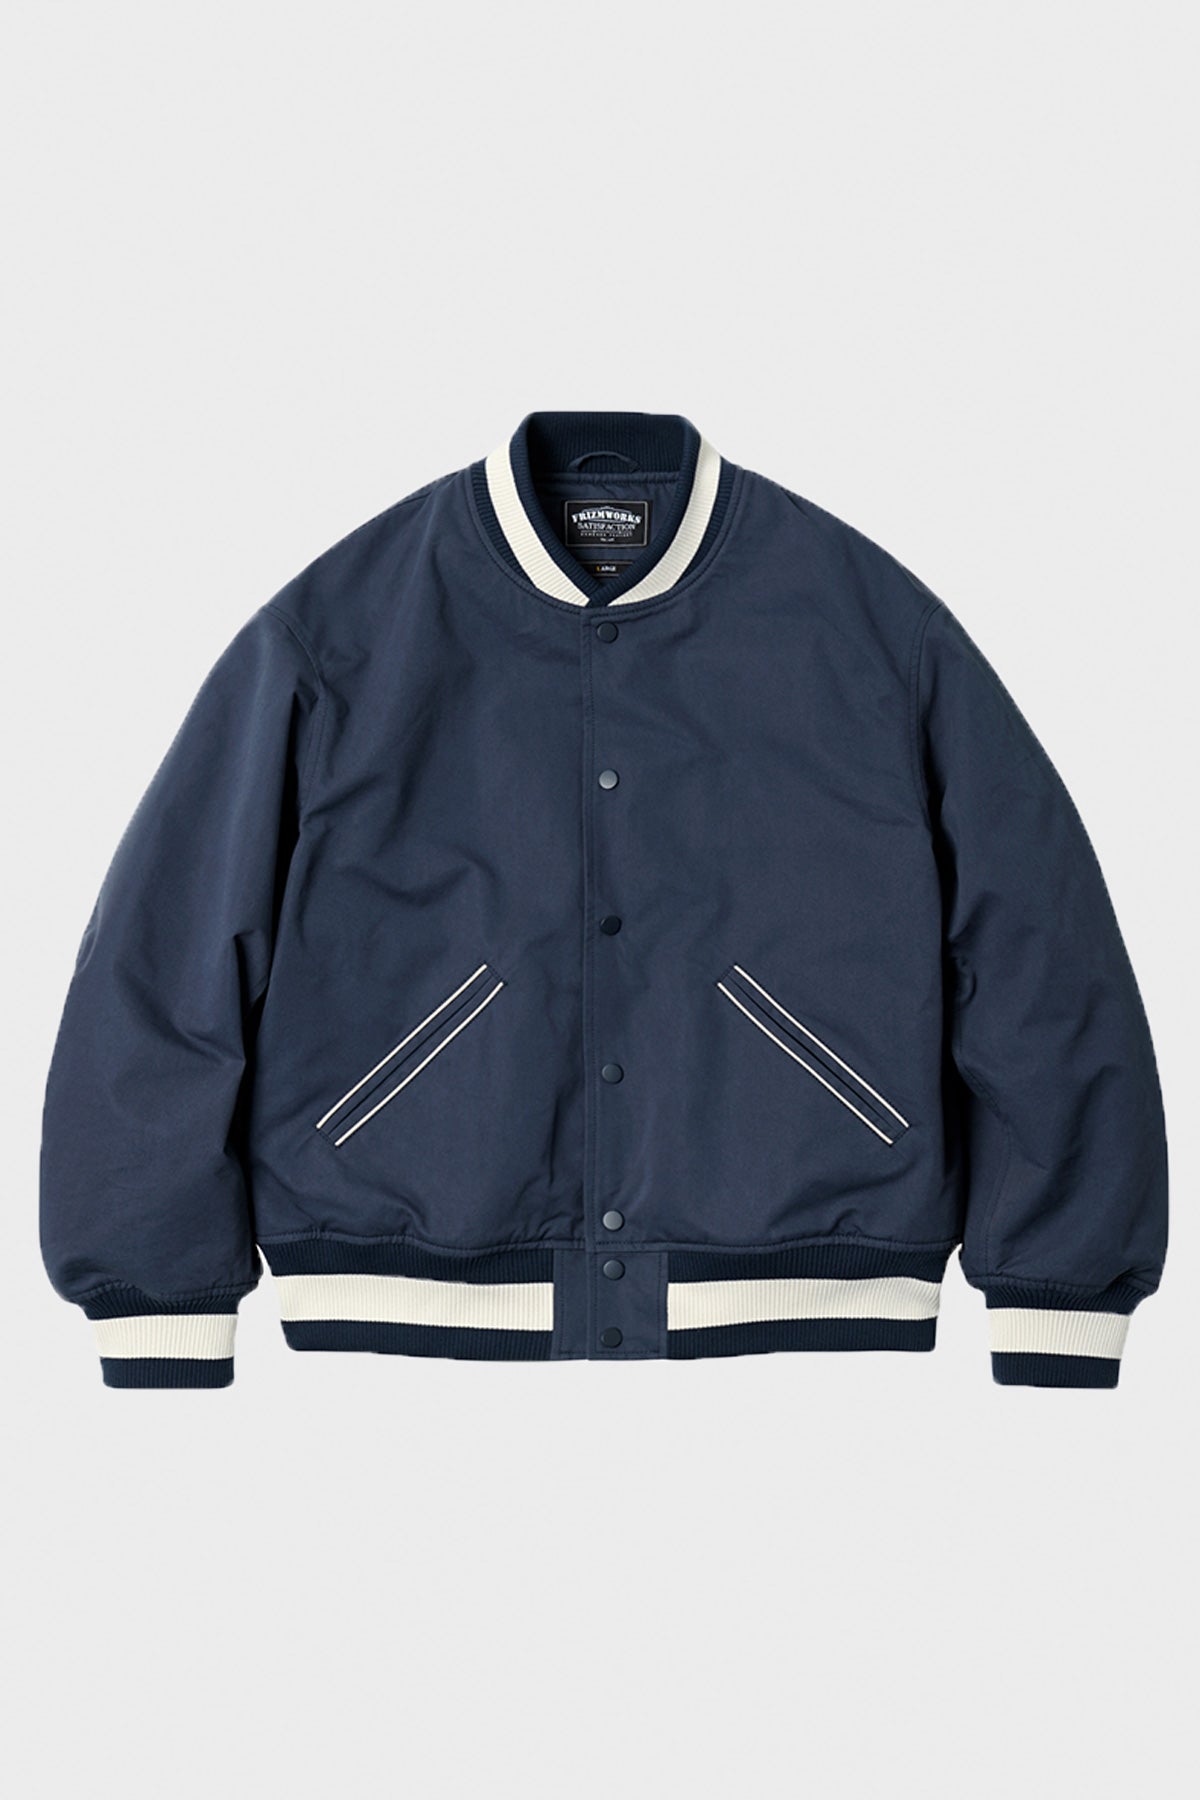 KAPITAL Faux Leather and Wool-Blend Varsity Jacket for Men